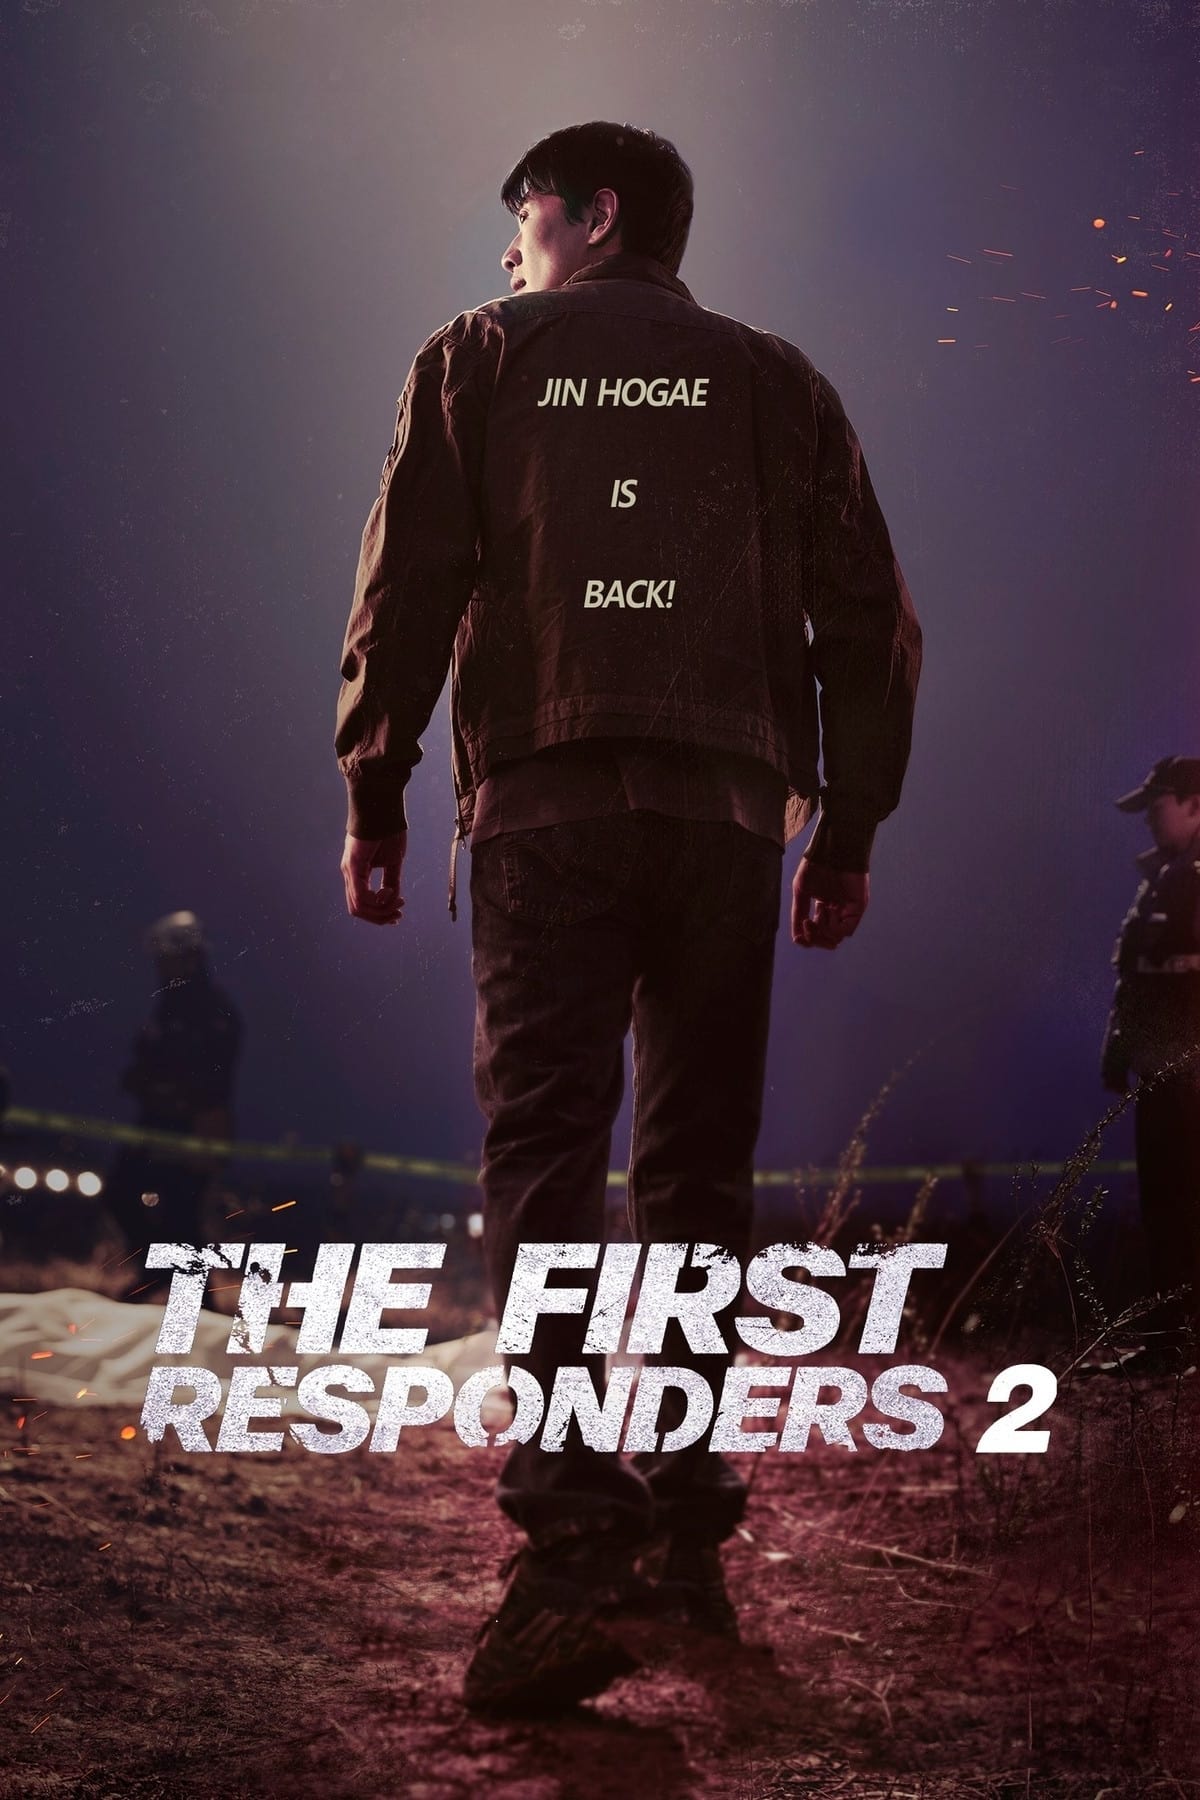  The First Responders